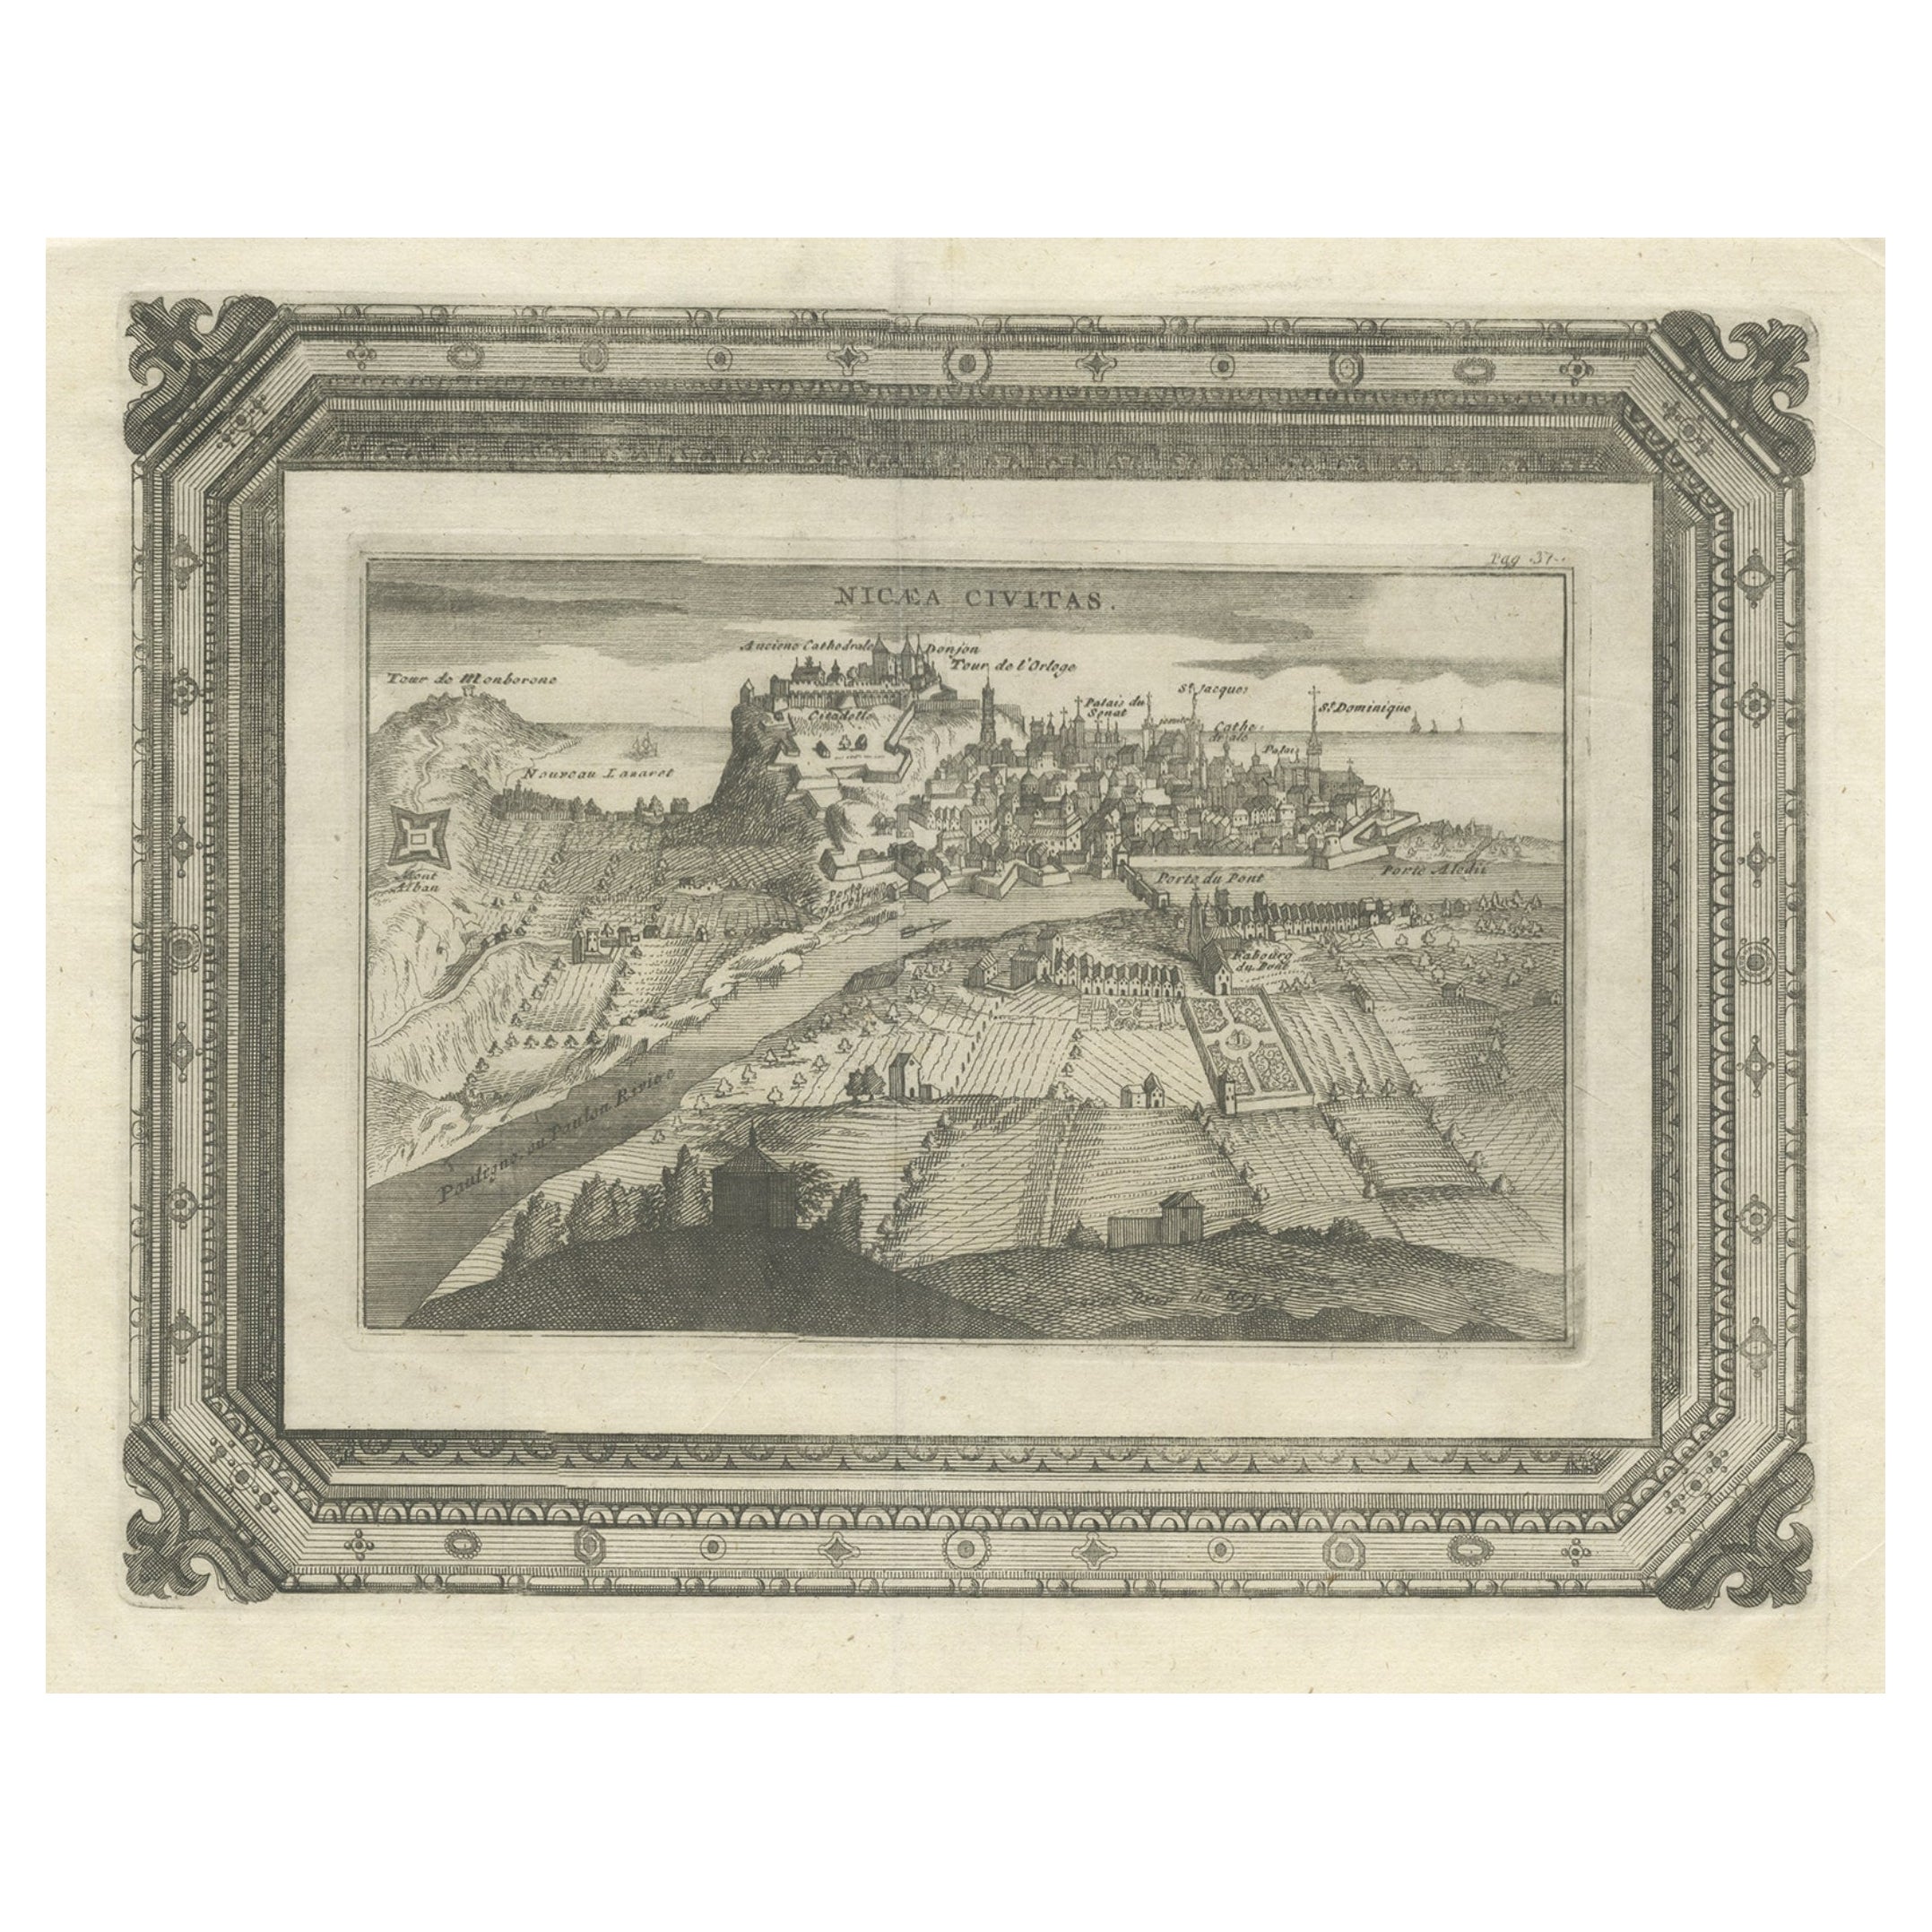 Very Rare Antique Print of the City of Nice in France, c.1700 For Sale